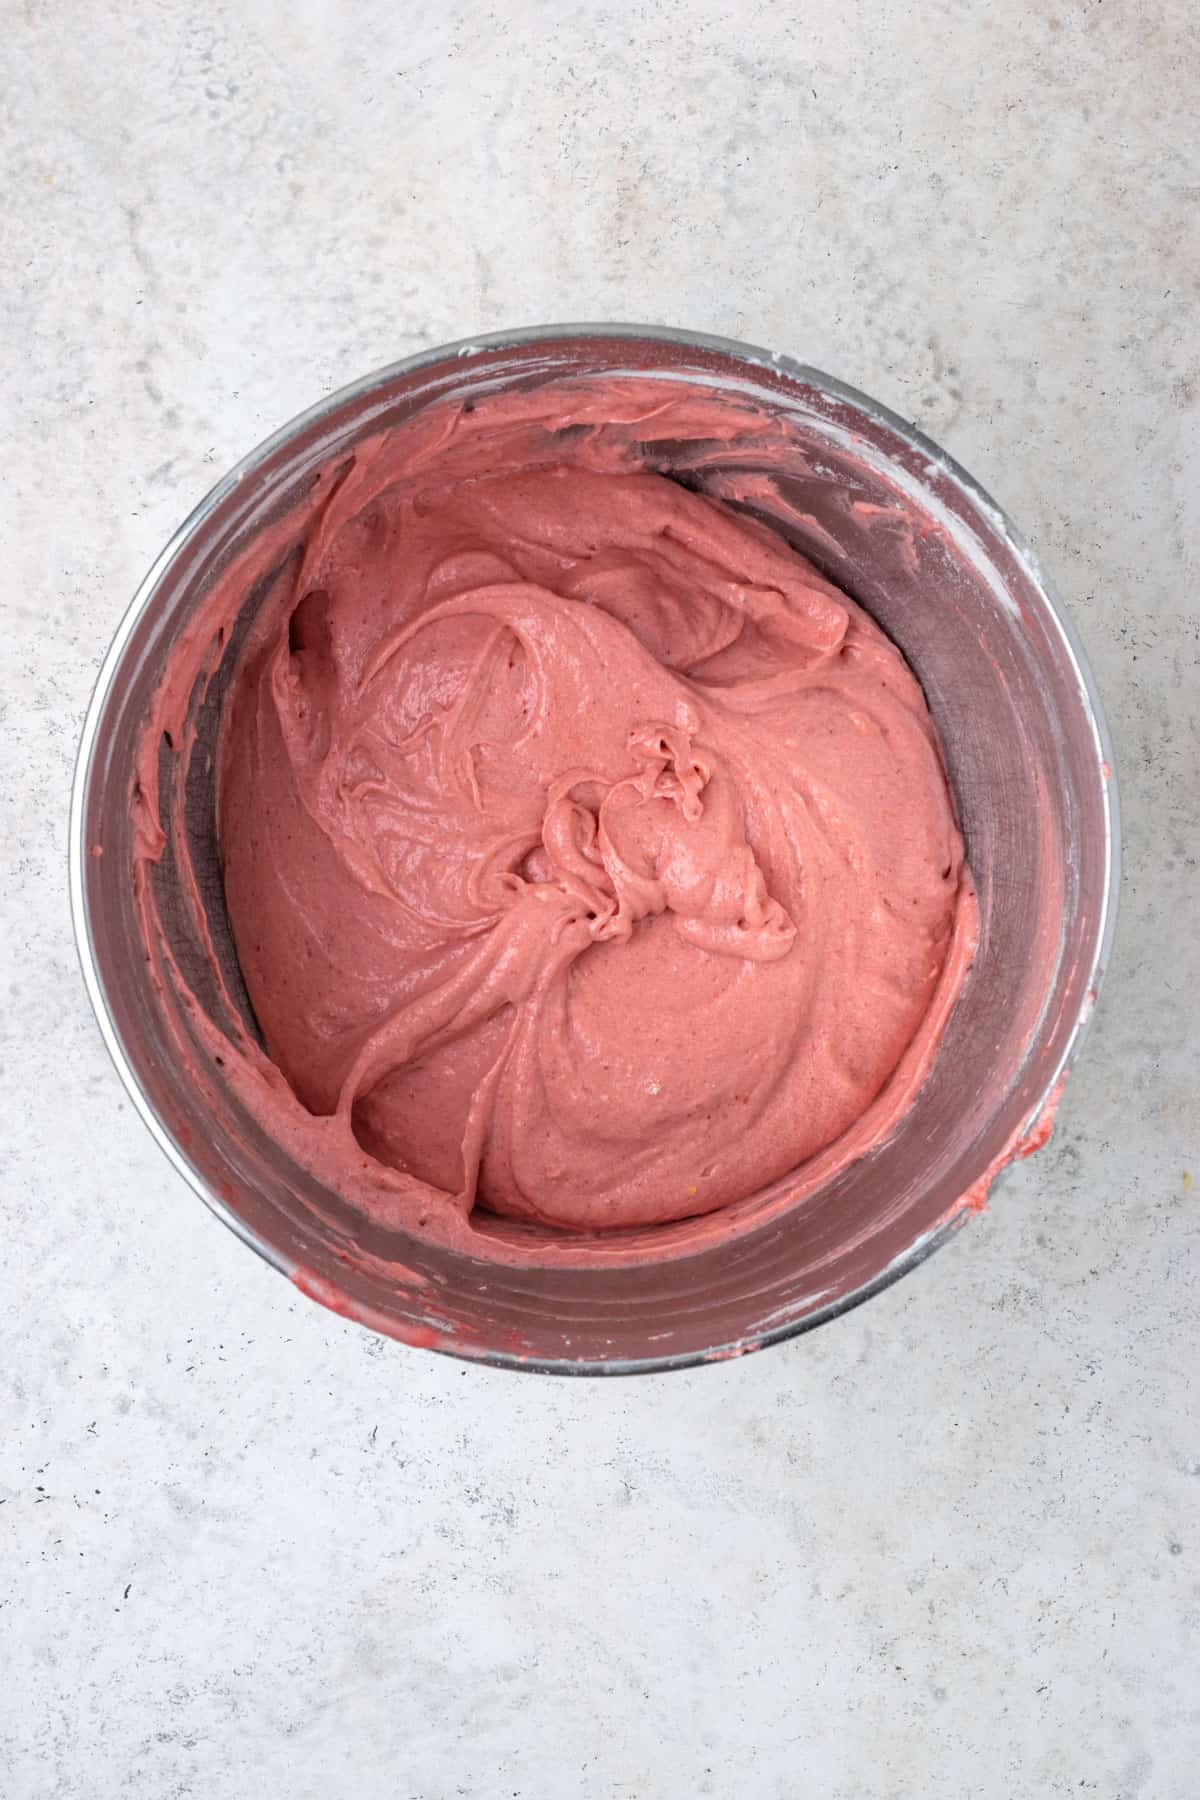 Strawberry cake batter in a large metal mixing bowl.